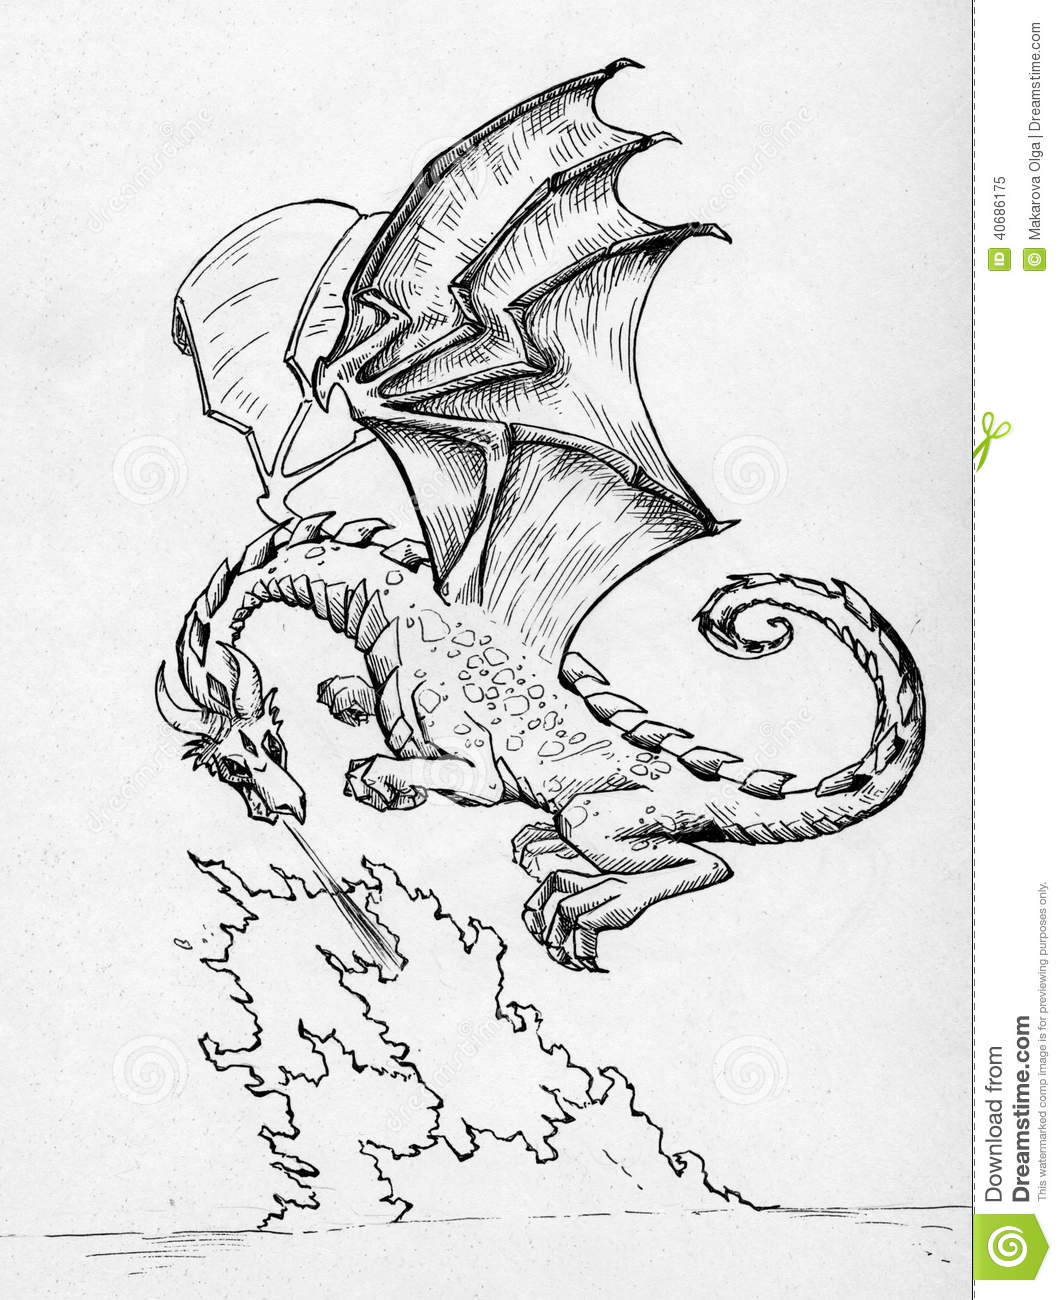 Fire Breathing Dragon Sketch At Explore Collection 3433